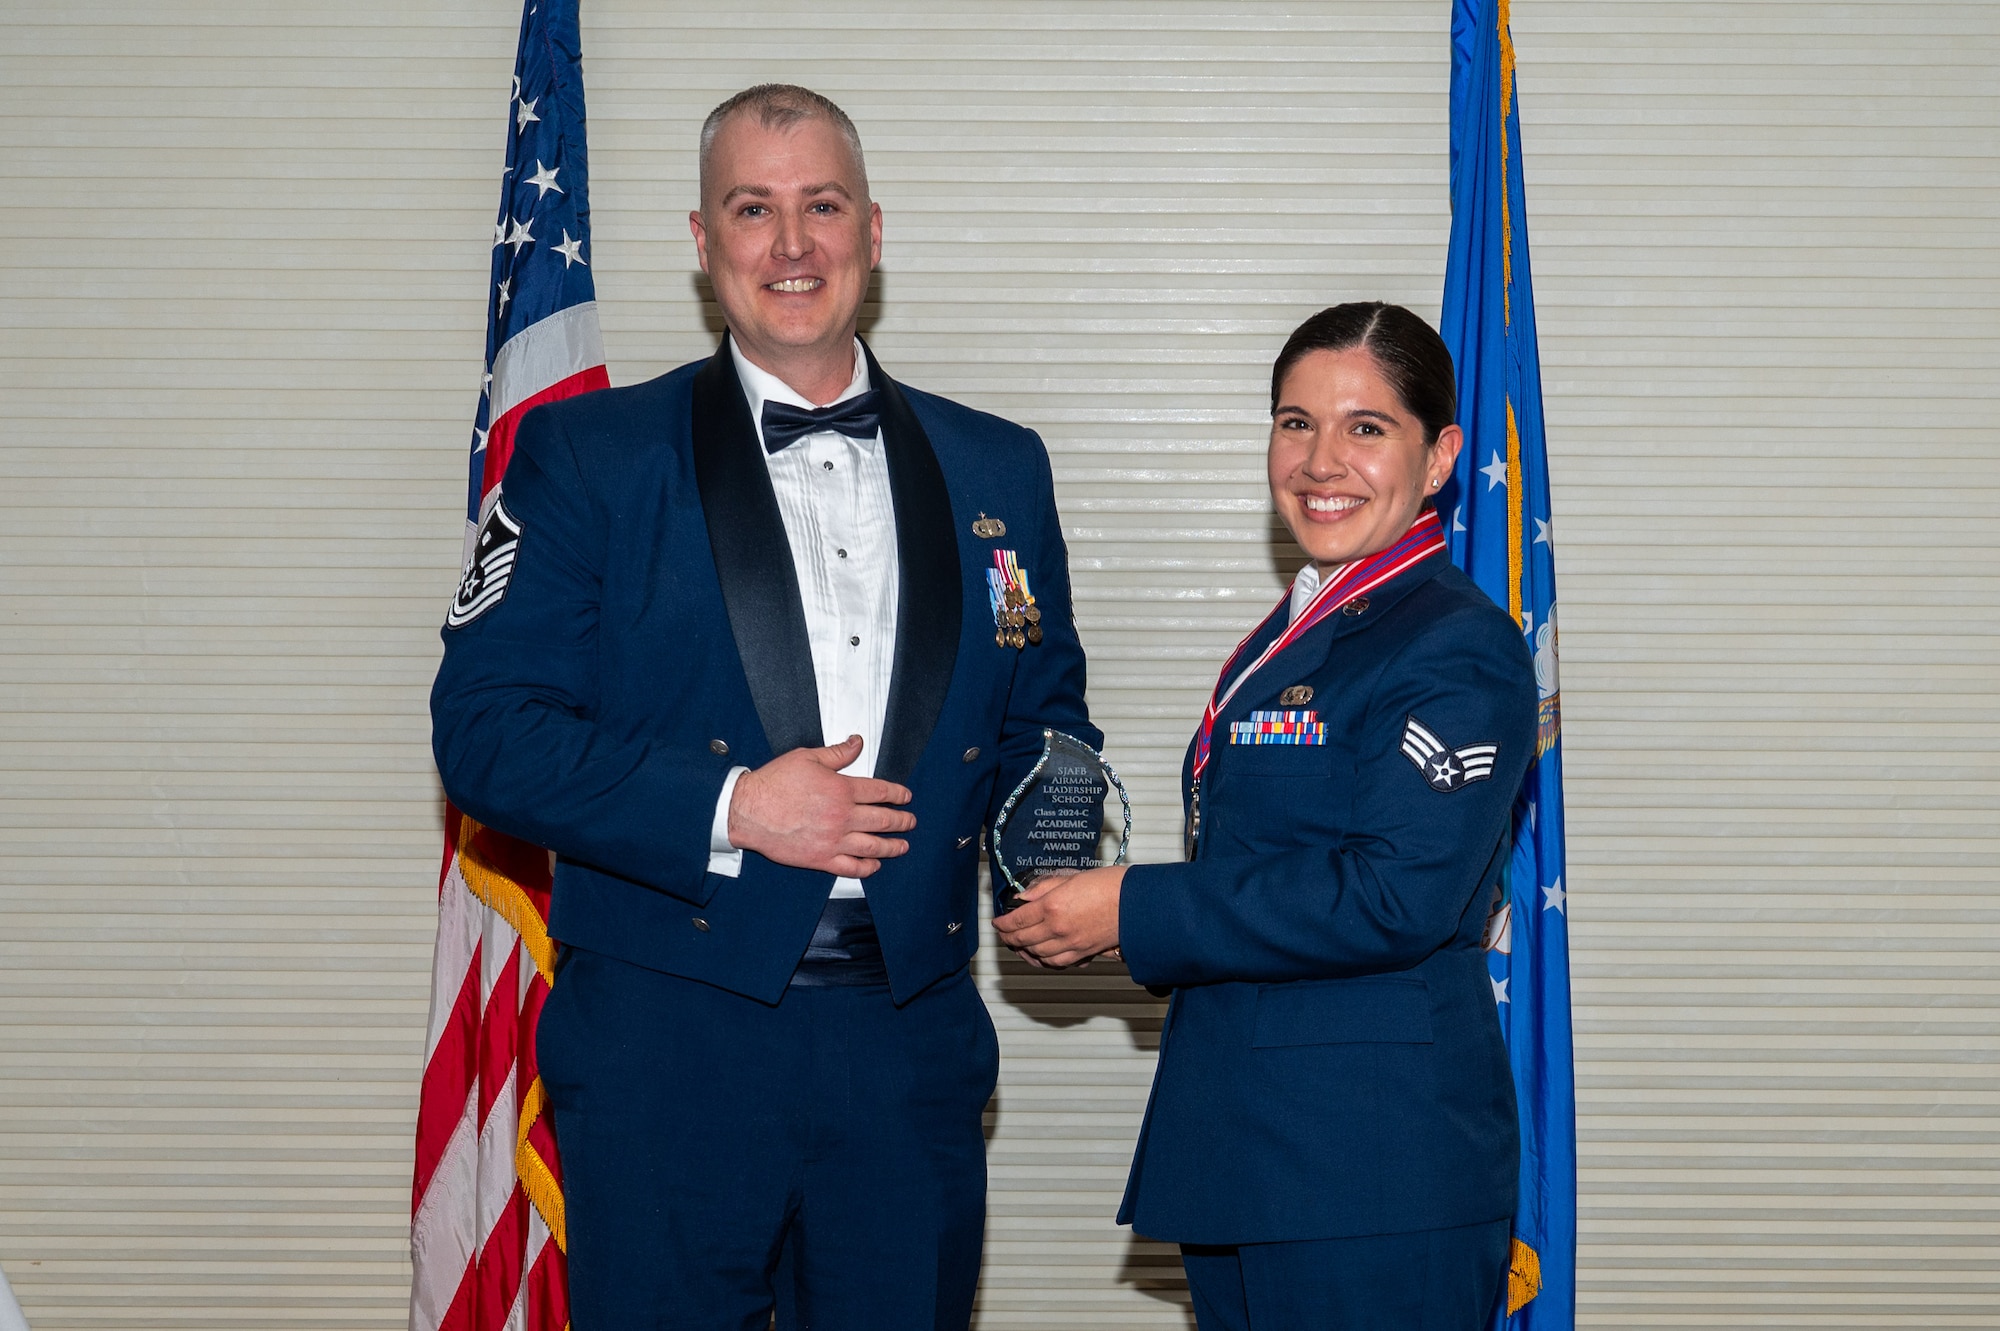 Senior Airman Gabriella Flores, assigned to the 336th Fighter Squadron, right, receives the Academic Achievement Award from Master Sgt. Peter Creighton, 333rd Fighter Generation Squadron first sergeant, during the Airman Leadership School class 24-C graduation ceremony at Seymour Johnson Air Force Base, North Carolina, Mar. 20, 2024. The students presented with the Academic Achievement Award maintained the highest grade point average throughout the ALS course. (U.S. Air Force photo by Airman Rebecca Tierney)